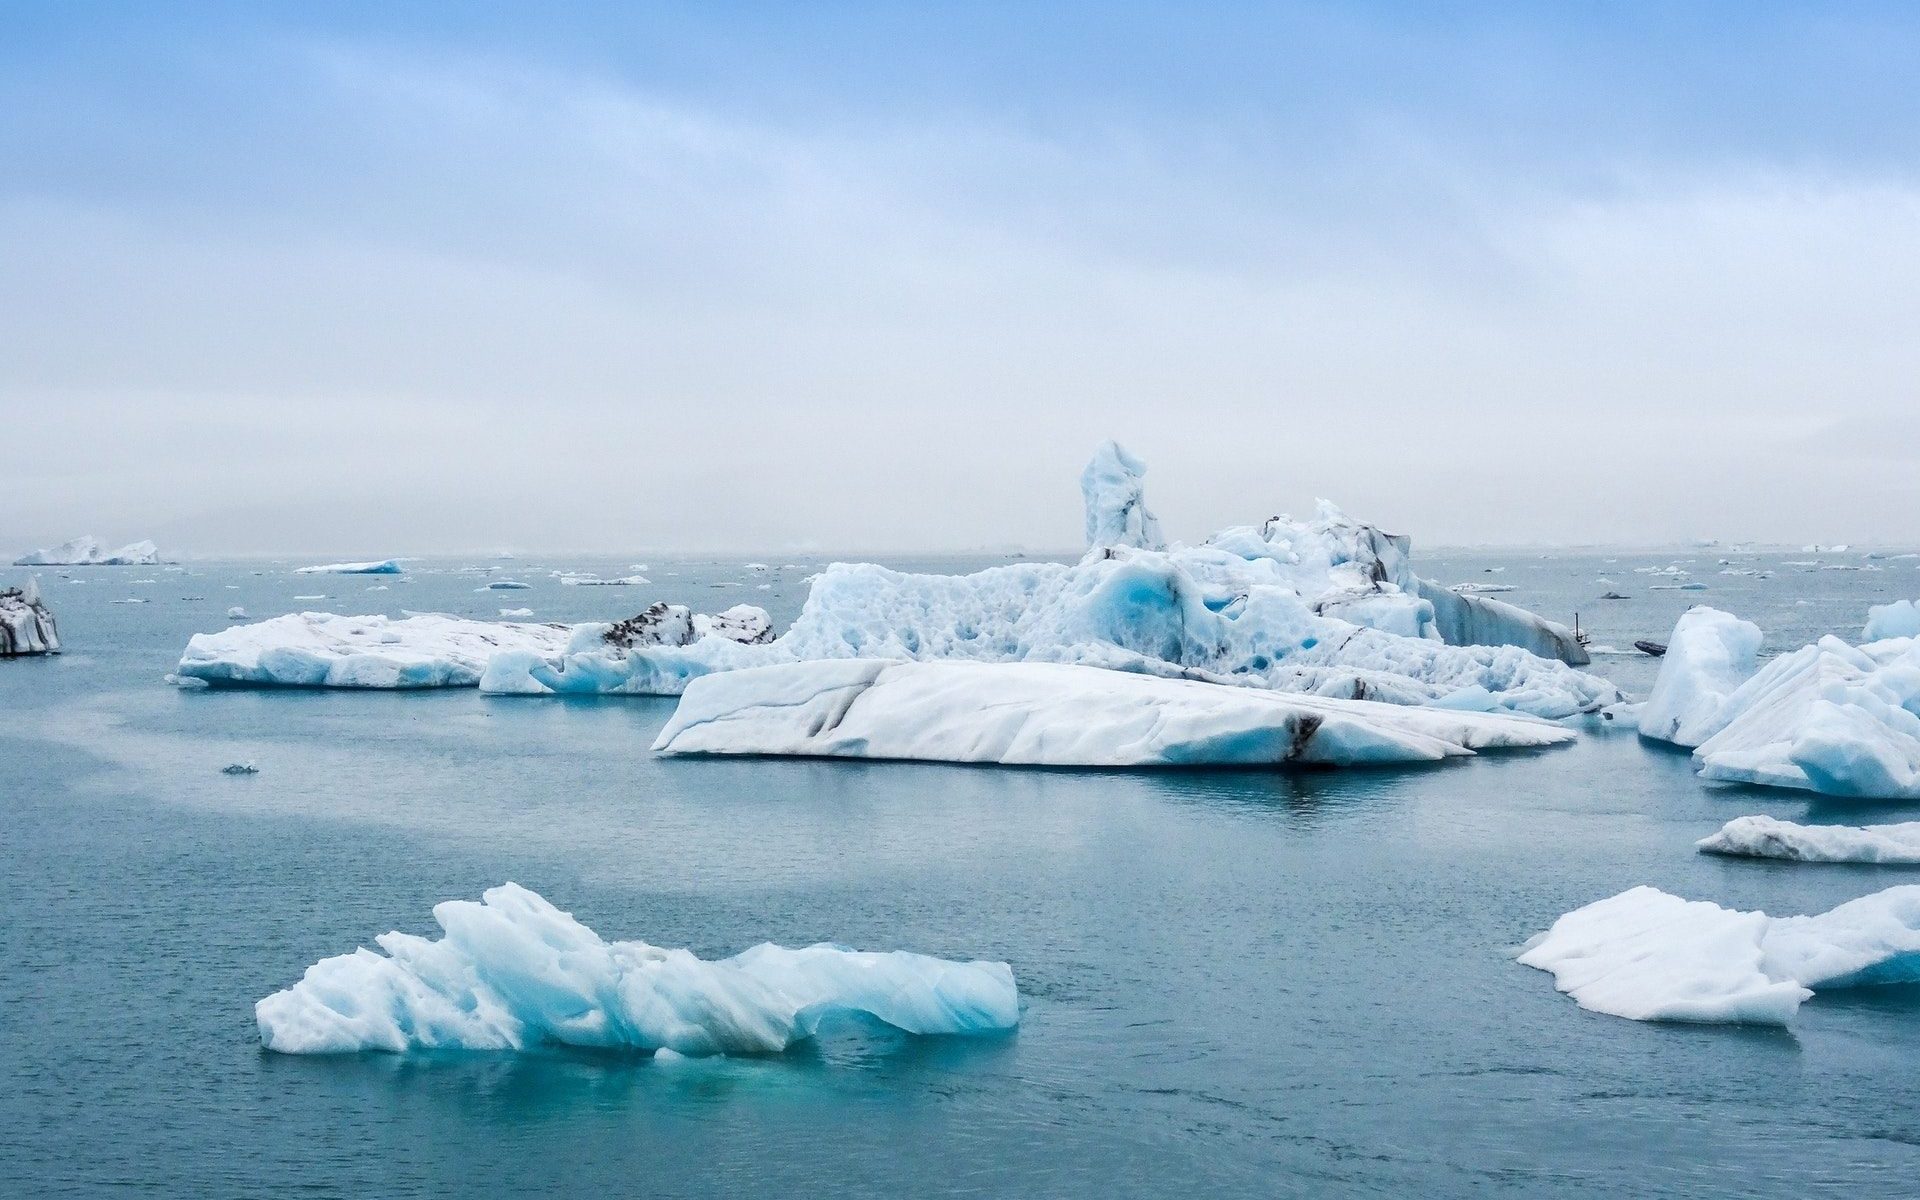 Melting Ice Bergs Photo by Guillaume Falco from Pexels